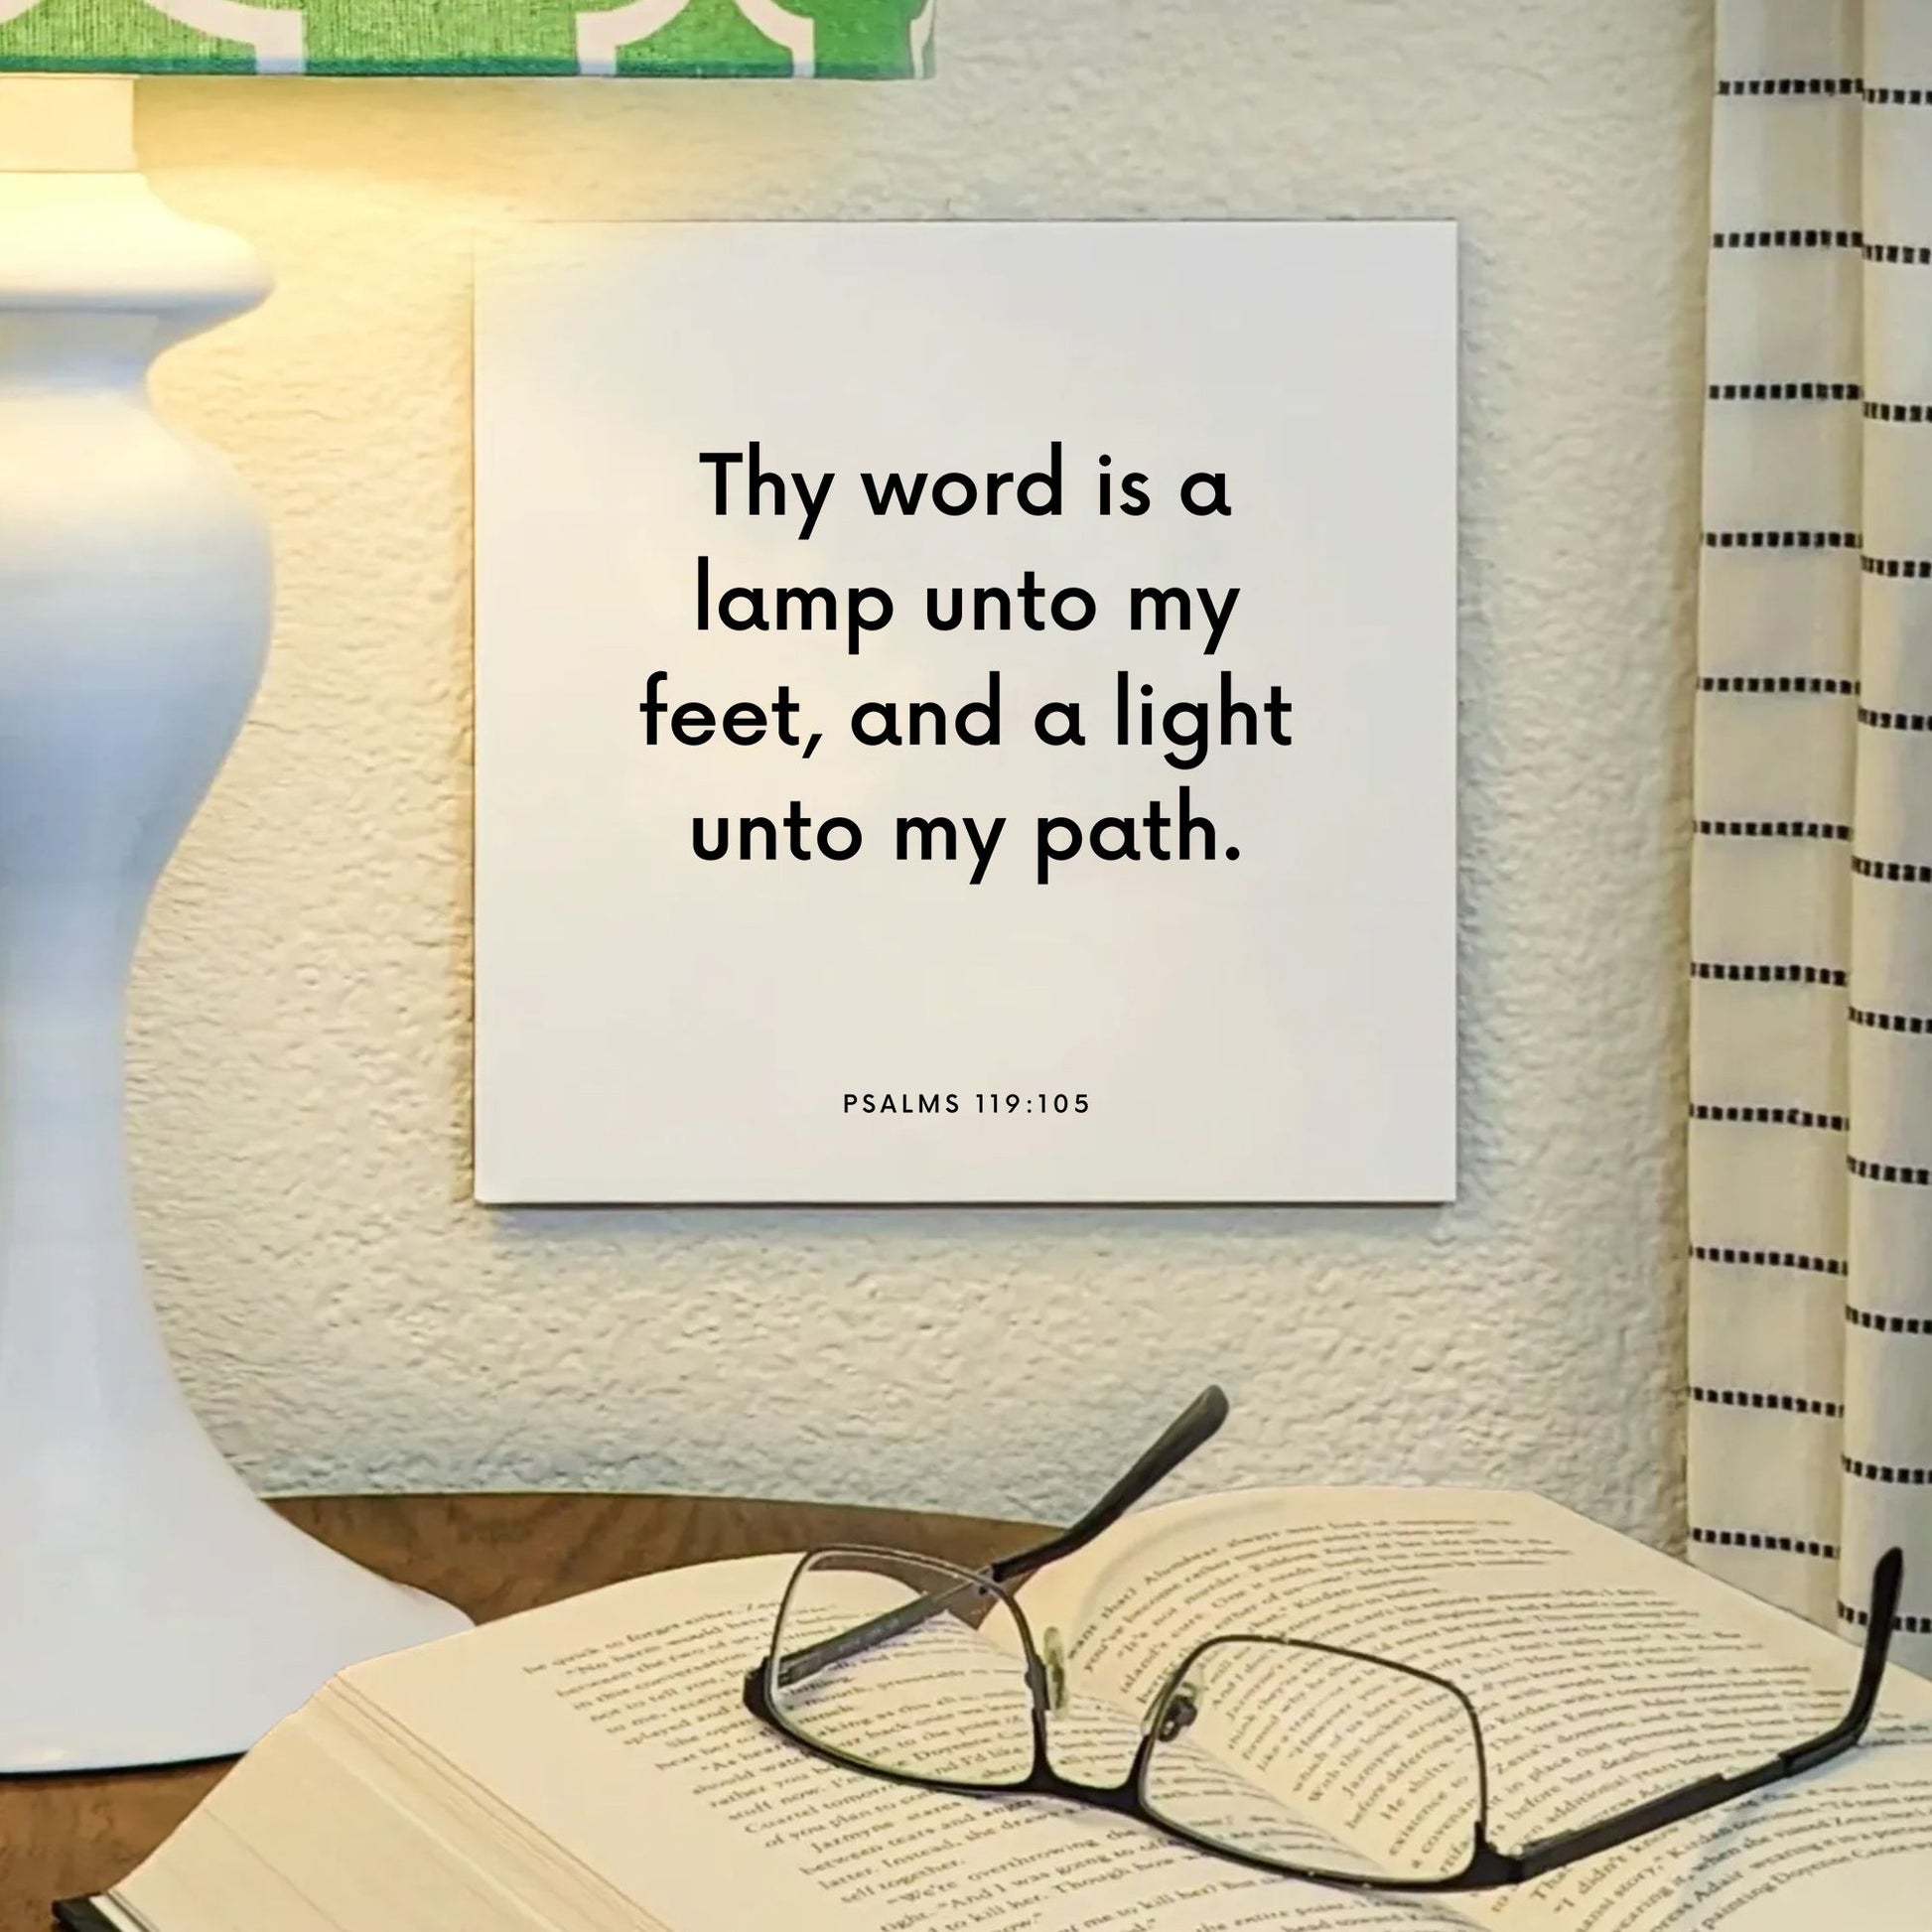 Lamp mouting of the scripture tile for Psalms 119:105 - "Thy word is a lamp unto my feet, and a light unto my path"